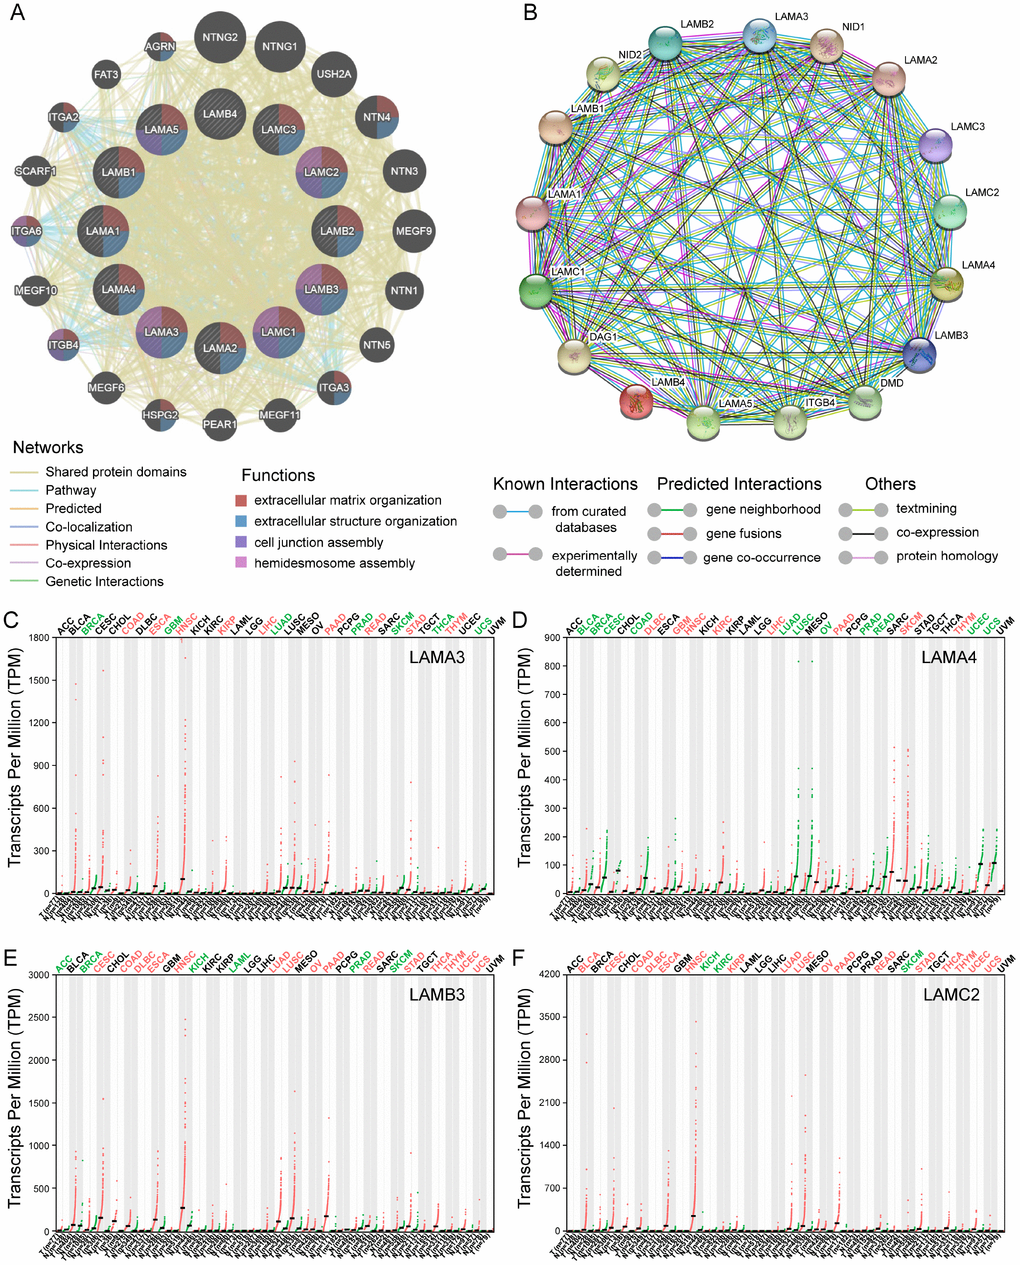 Gene-gene interaction and protein-protein interaction network of genes of the laminin family, and differential expression of laminin genes in various tumor and non-tumor tissues. (A) The gene network associated with the laminin gene family, drawn using GeneMANIA. The colored patches on the circle indicate the function of the gene. (B) A network diagram of interactions between proteins encoded by genes of the laminin family, drawn using STRING. (C–F) The difference in expression of LAMA3, LAMA4, LAMB3 and LAMC2 in various tissues in TCGA, drawn using GEPIA. Green color indicates that the gene is downregulated, whereas red color indicates upregulation of the gene.